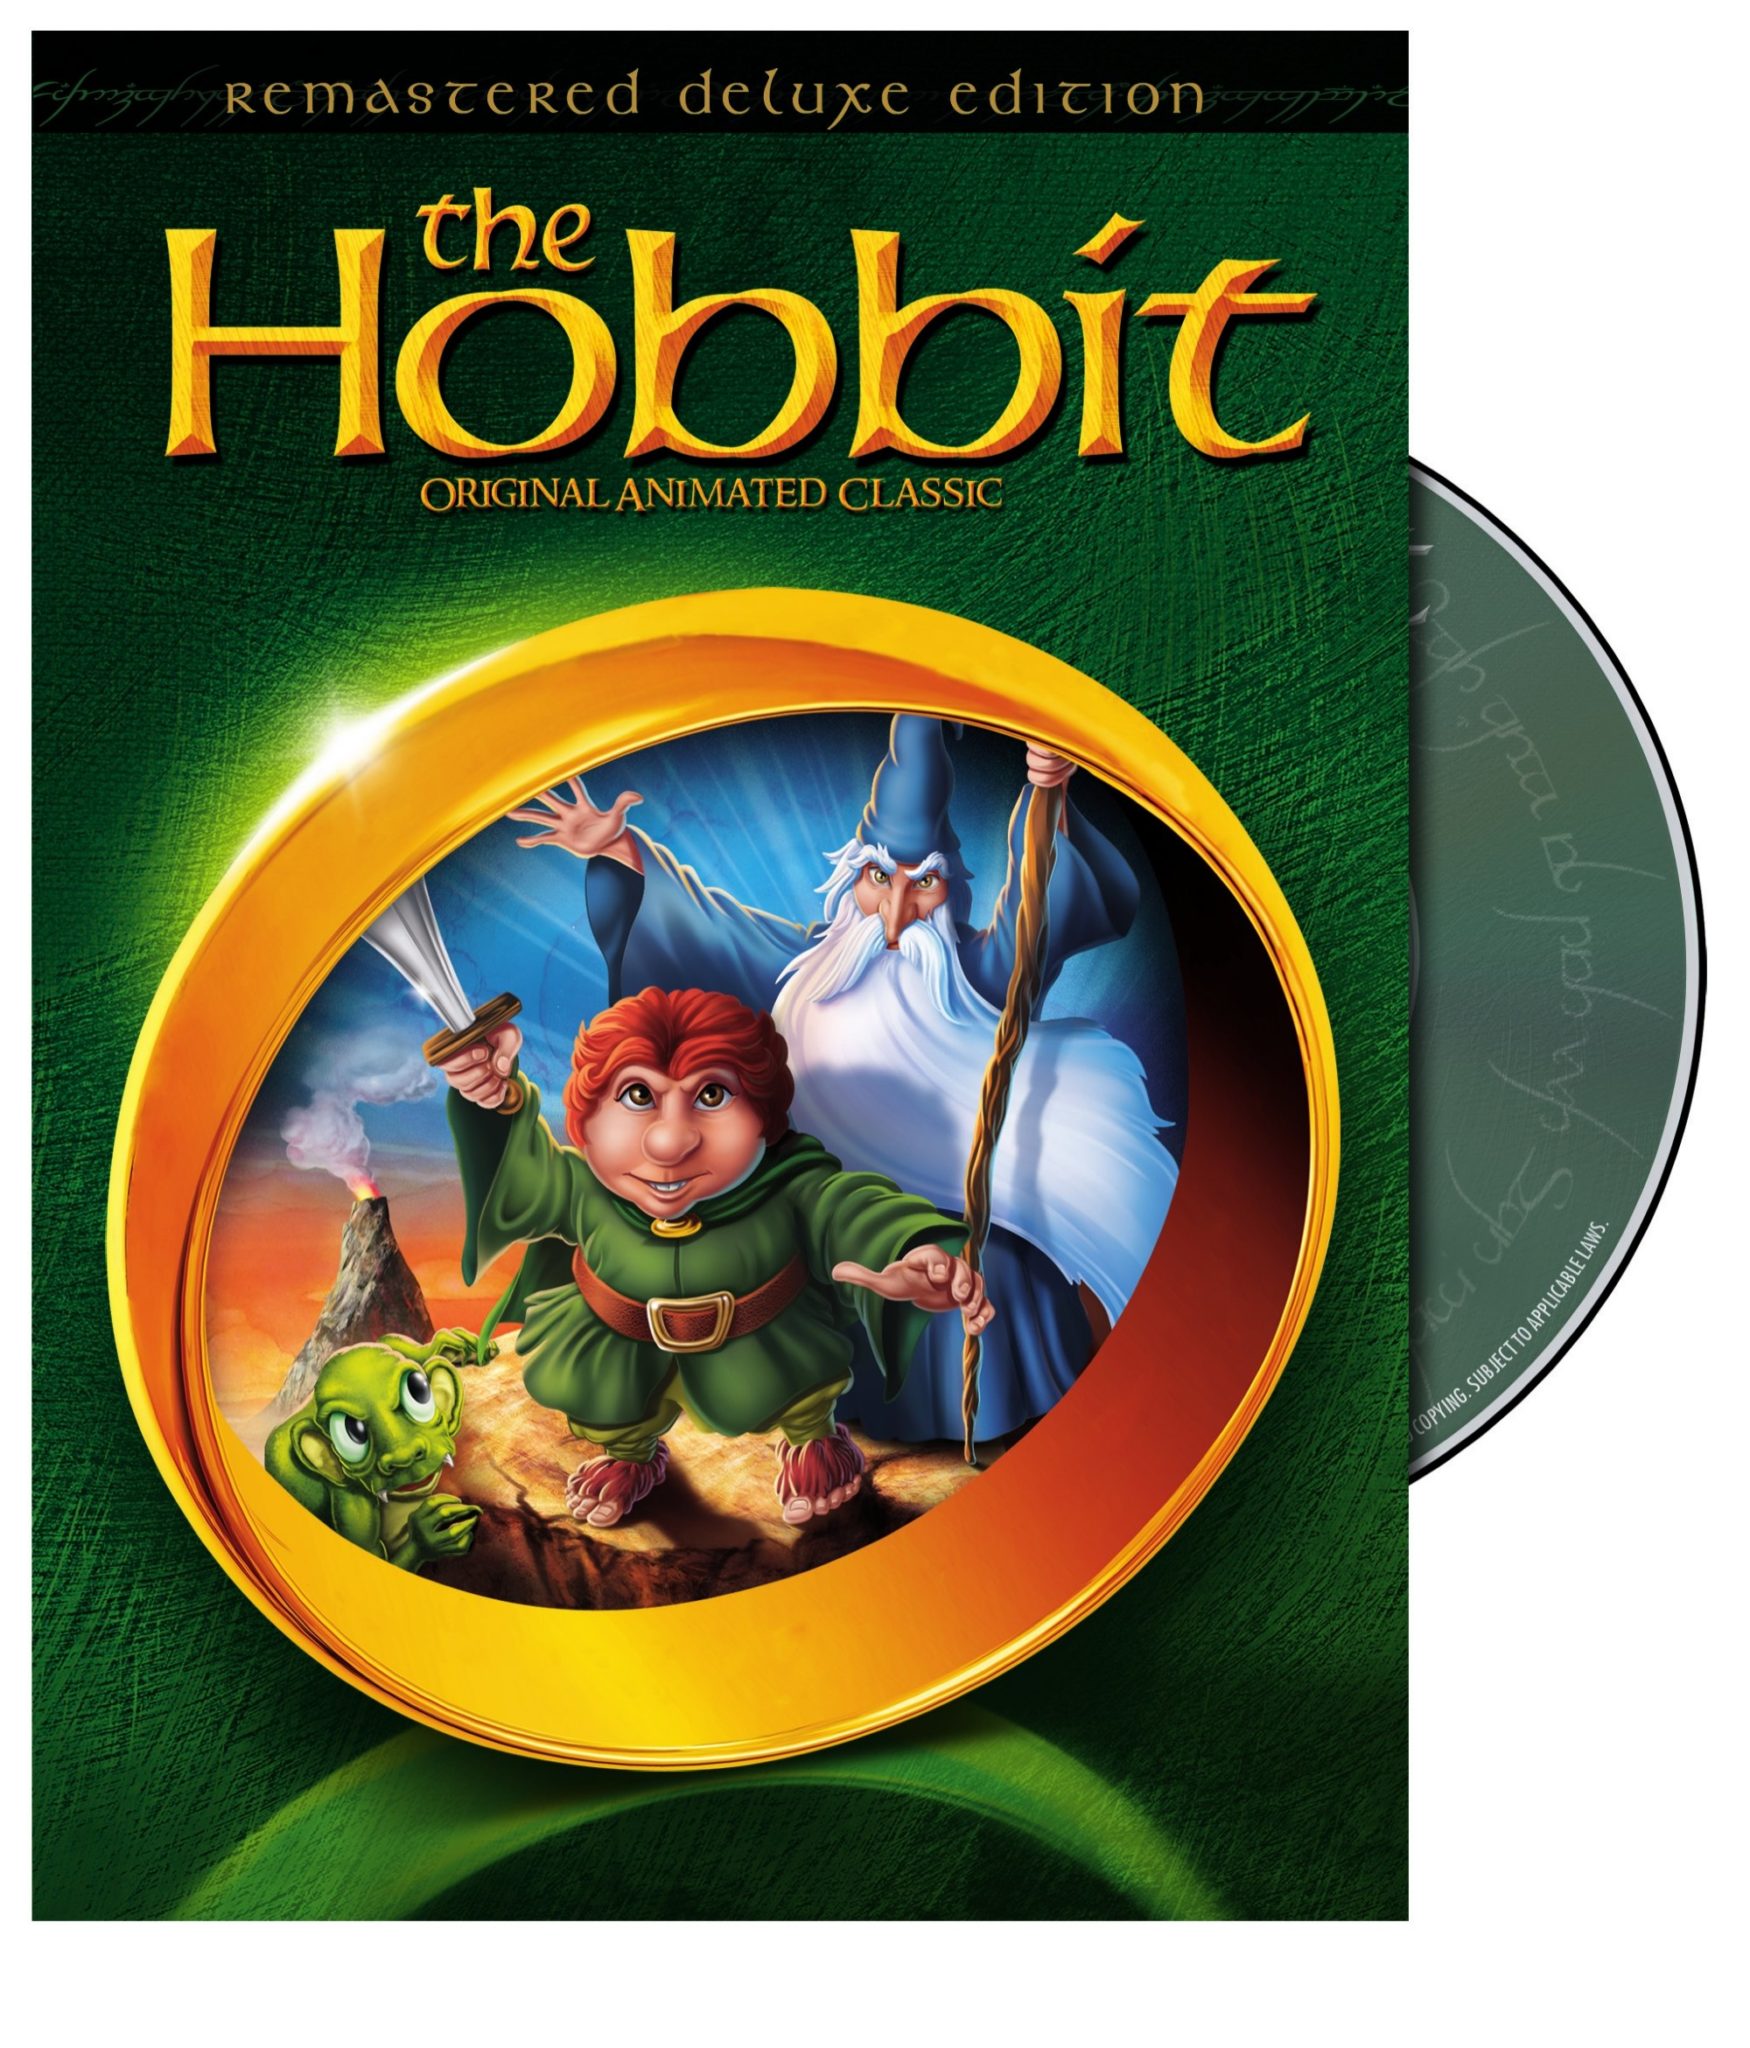 [REVIEW] The Hobbit Deluxe Edition DVD Rotoscopers